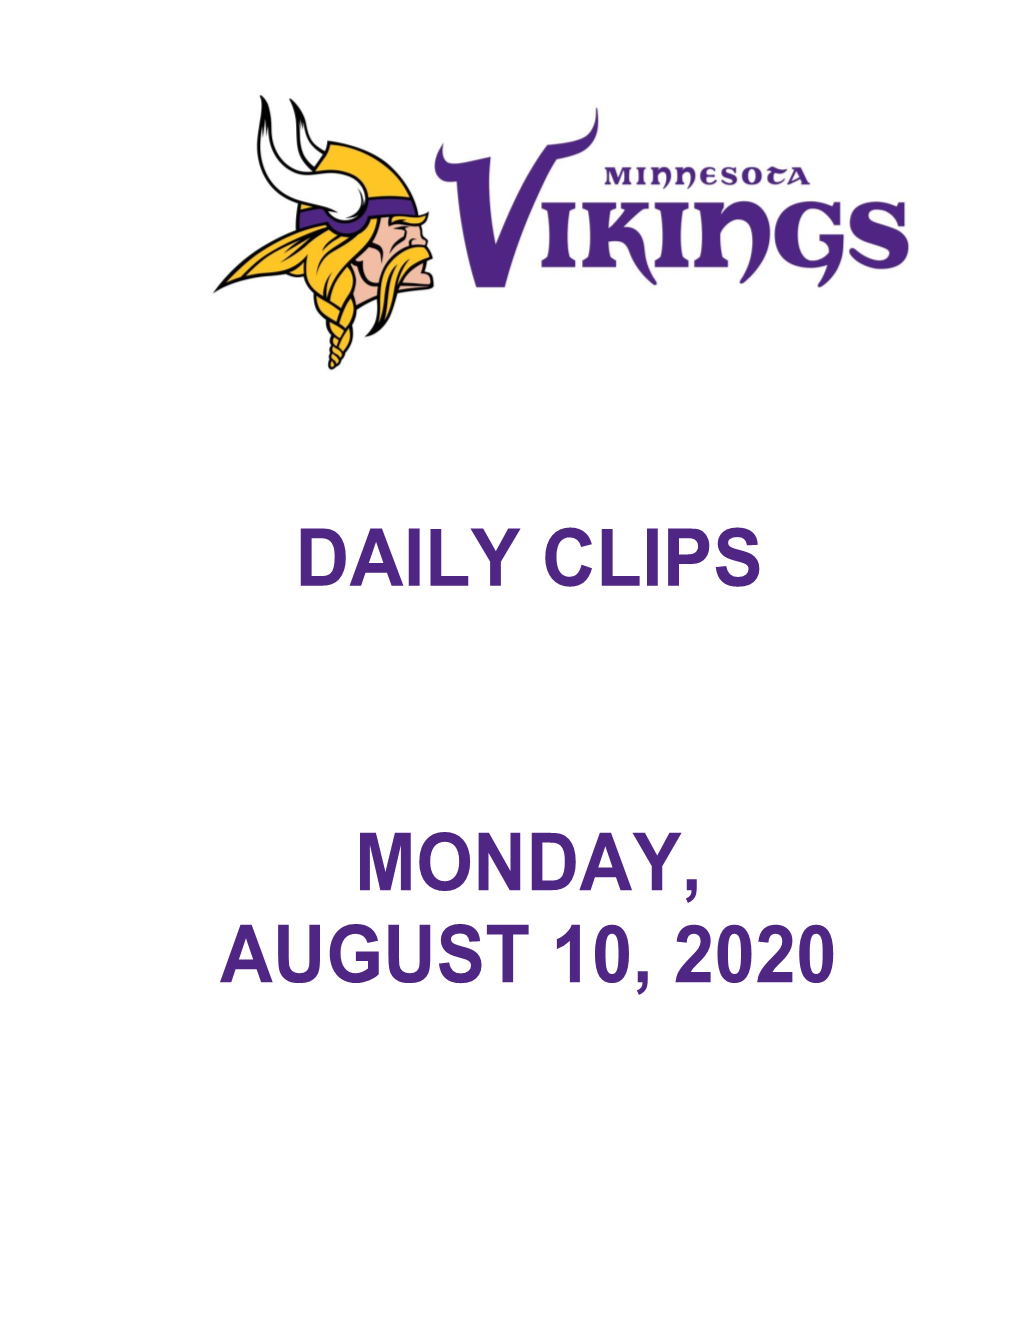 Daily Clips Monday, August 10, 2020